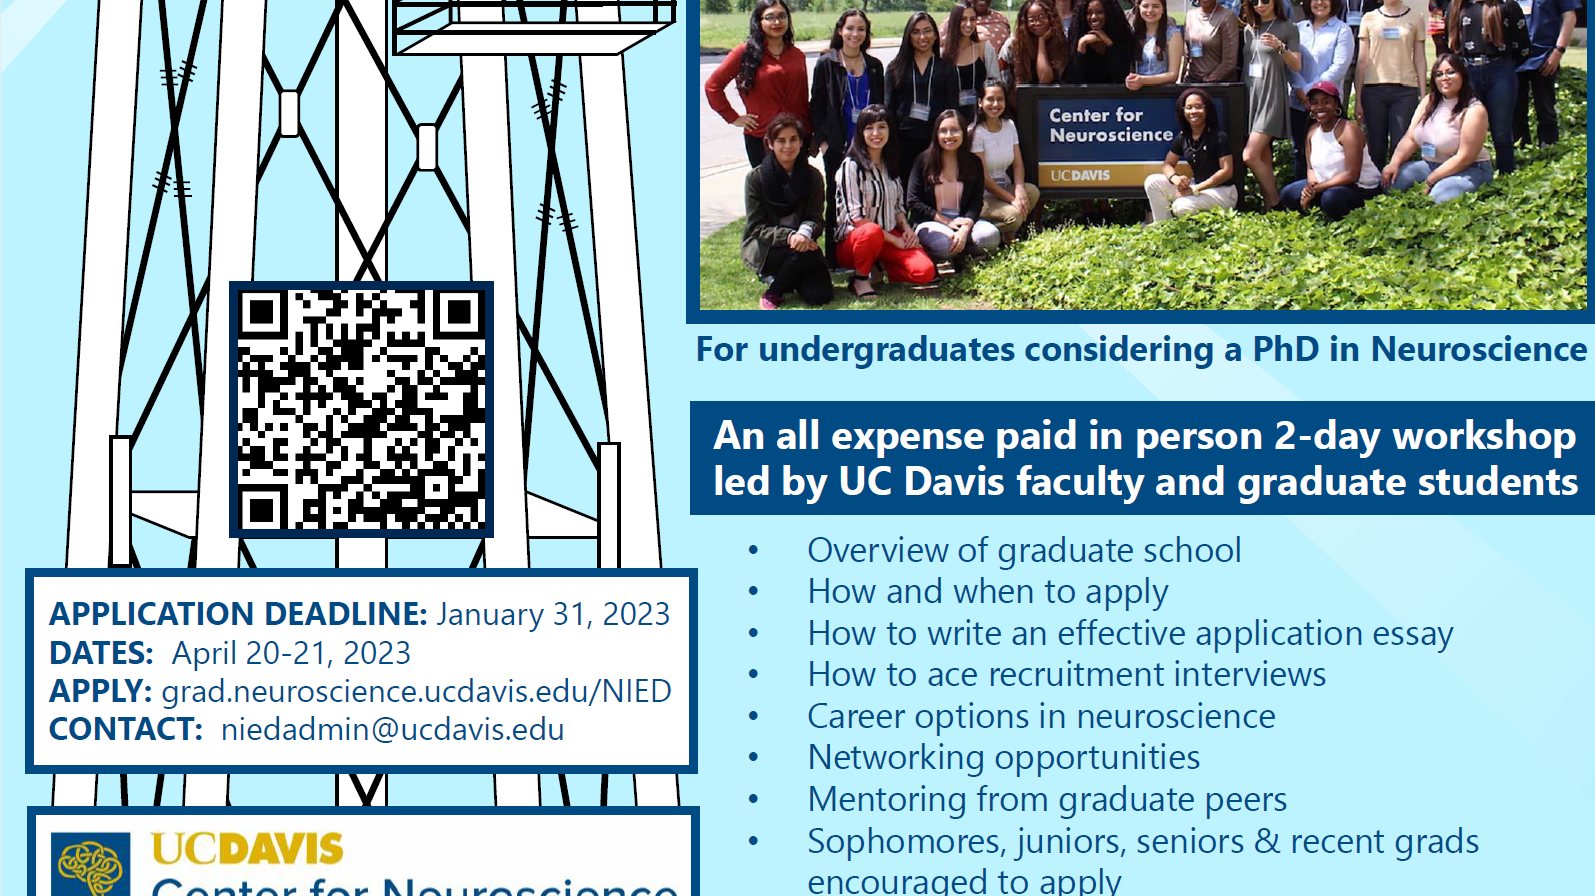 Student opportunity at UC Davis